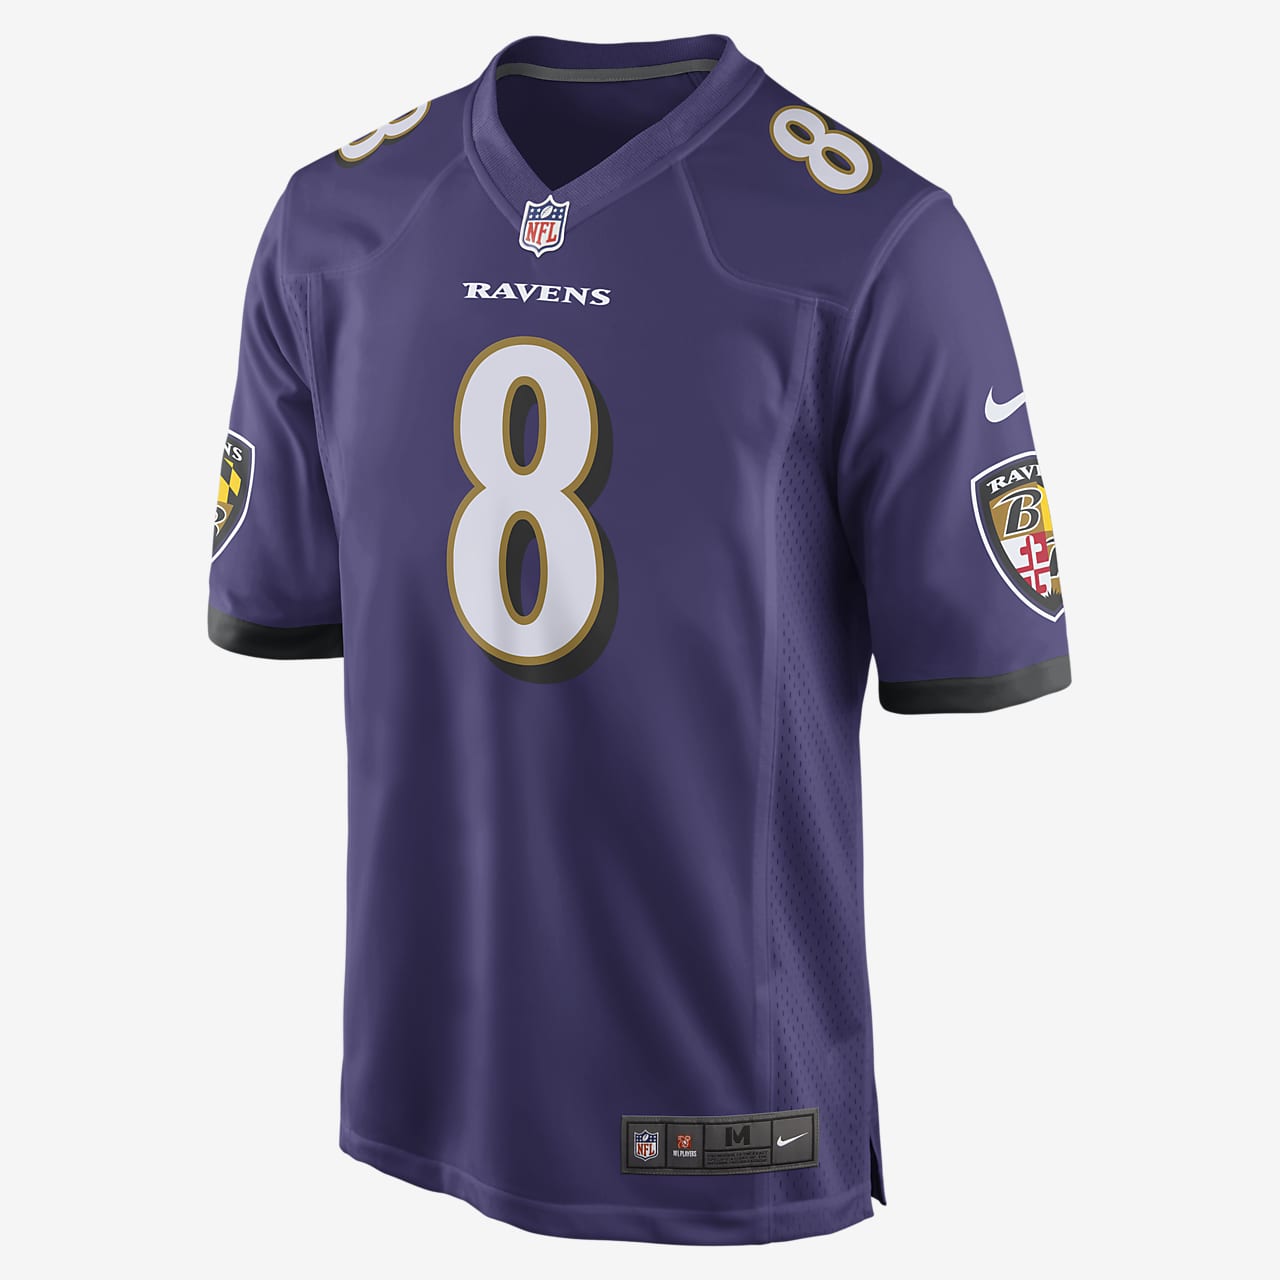 where to buy baltimore ravens gear